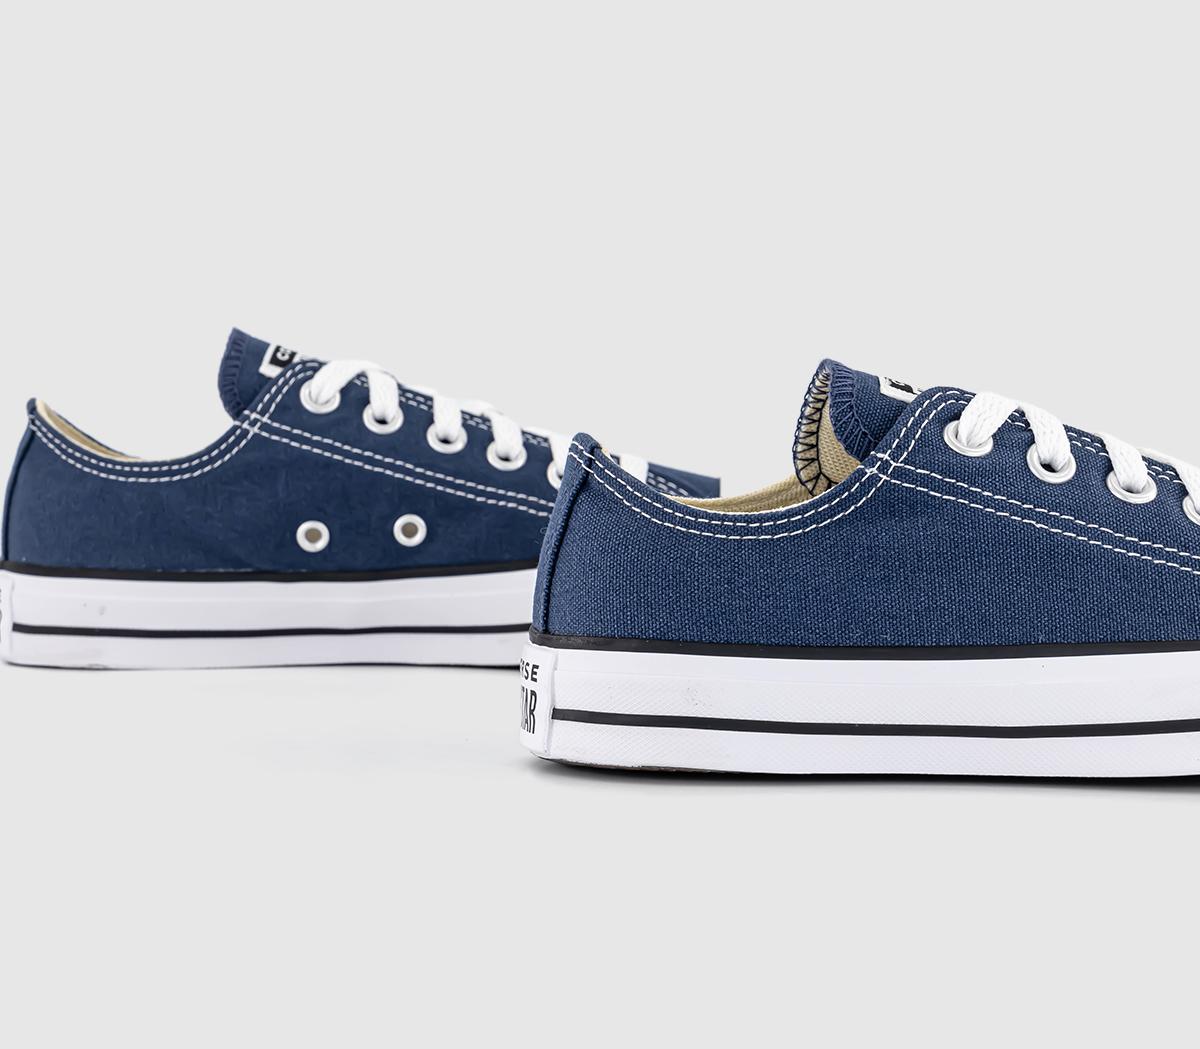 Converse All Star Low Navy Canvas - Unisex Sports